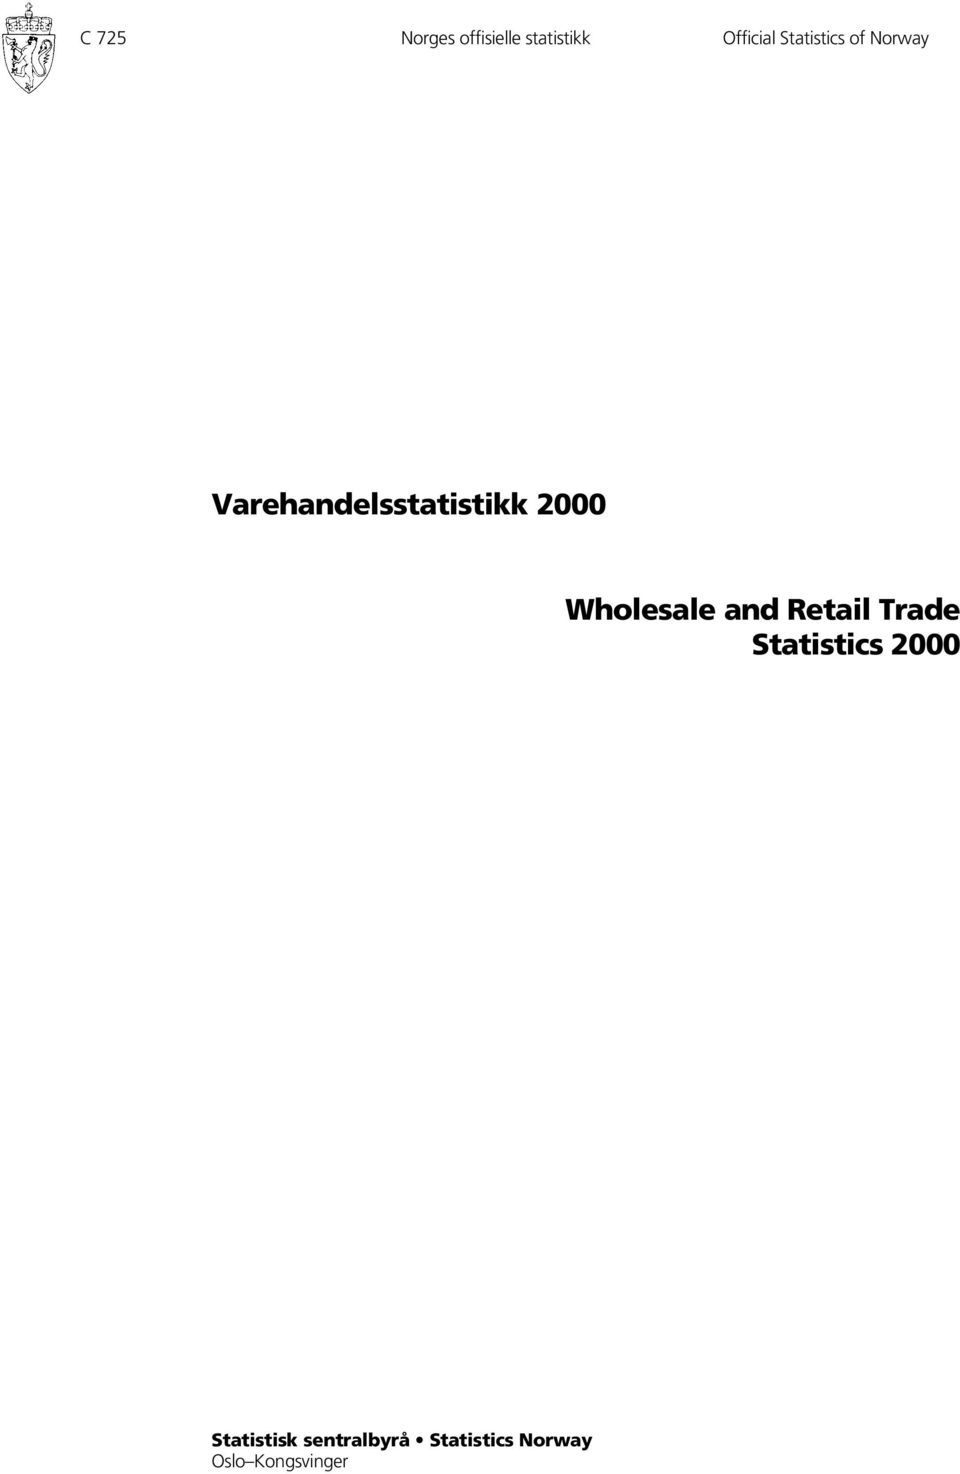 Wholesale and Retail Trade Statistics 2000